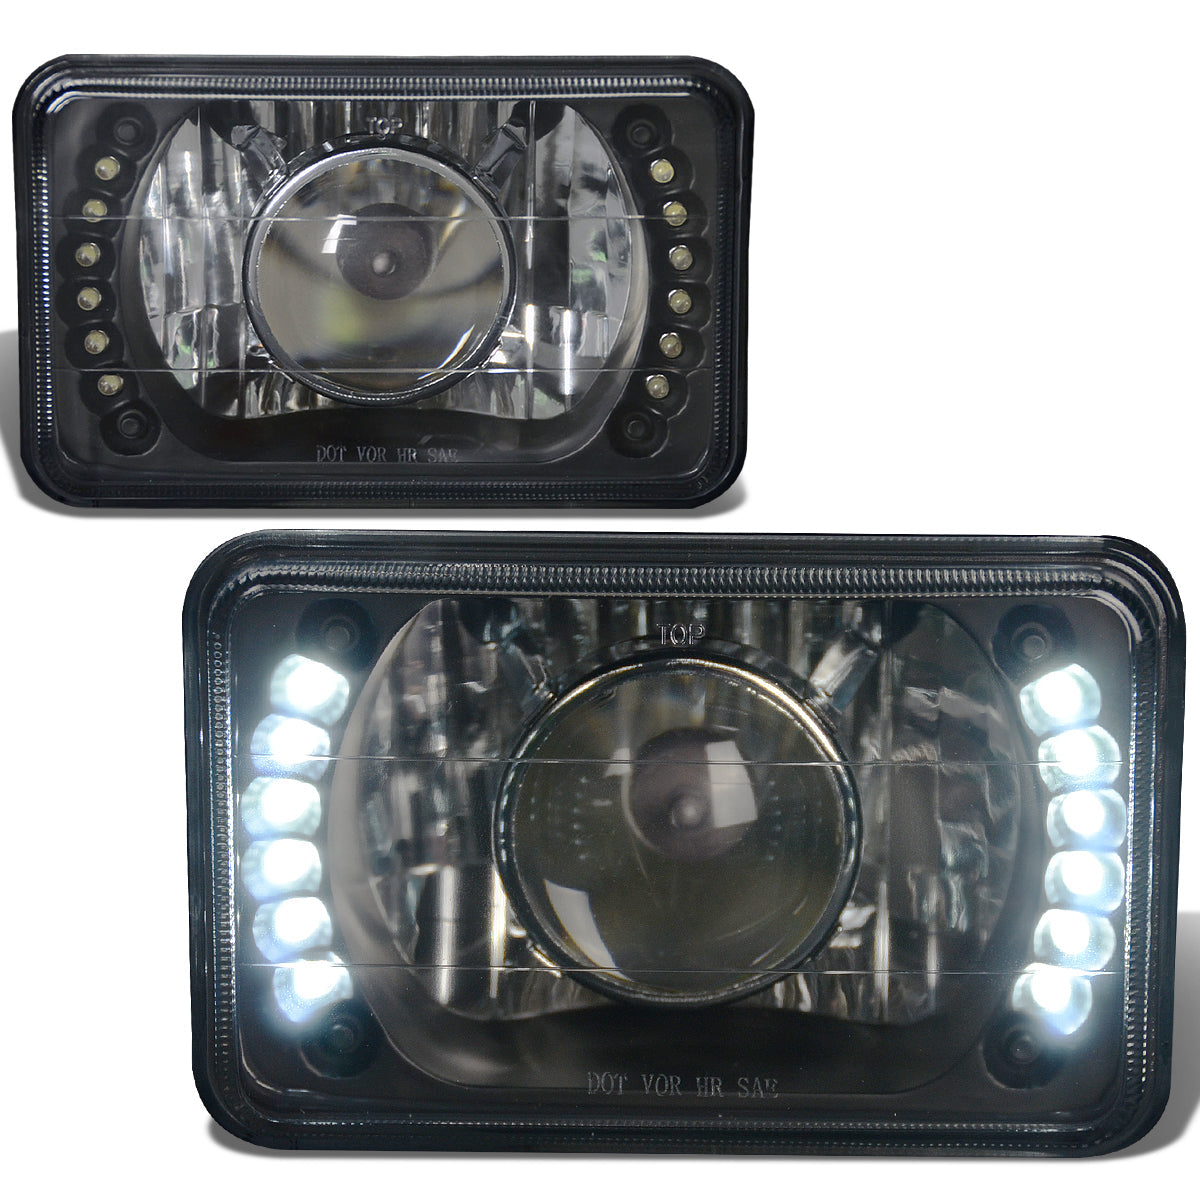 4x6 in. Square LED Halo Projector Headlights